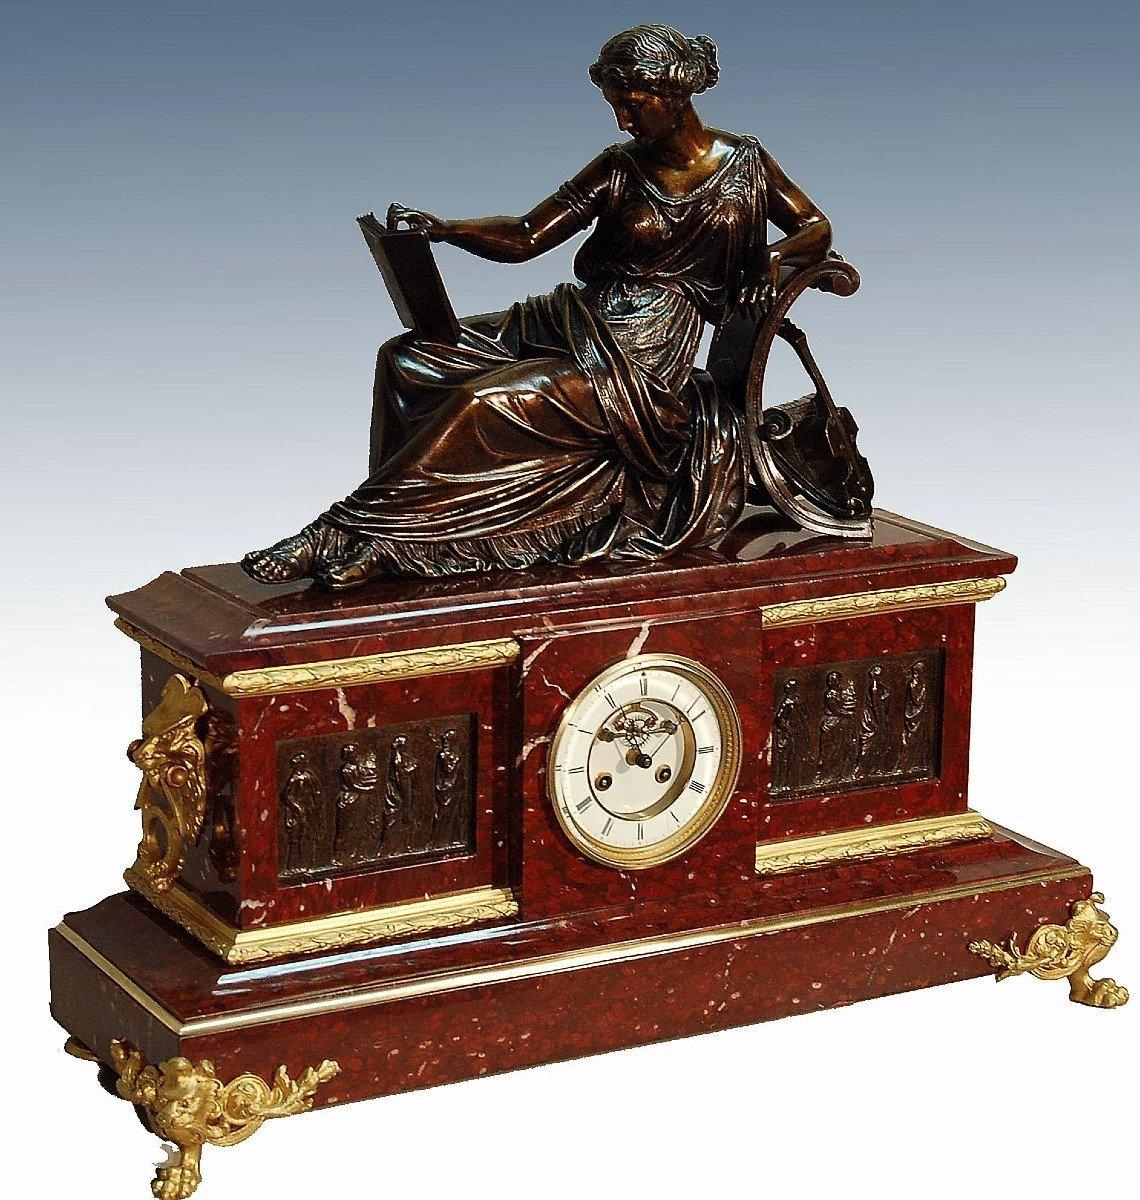 Important clock in royal red marble, surmounted by a patinated bronze sculpture, a woman lying on a couch, she is dressed in antique clothes, she holds a music score in her hand. The theme of this sculpture is music. The red marble is decorated with